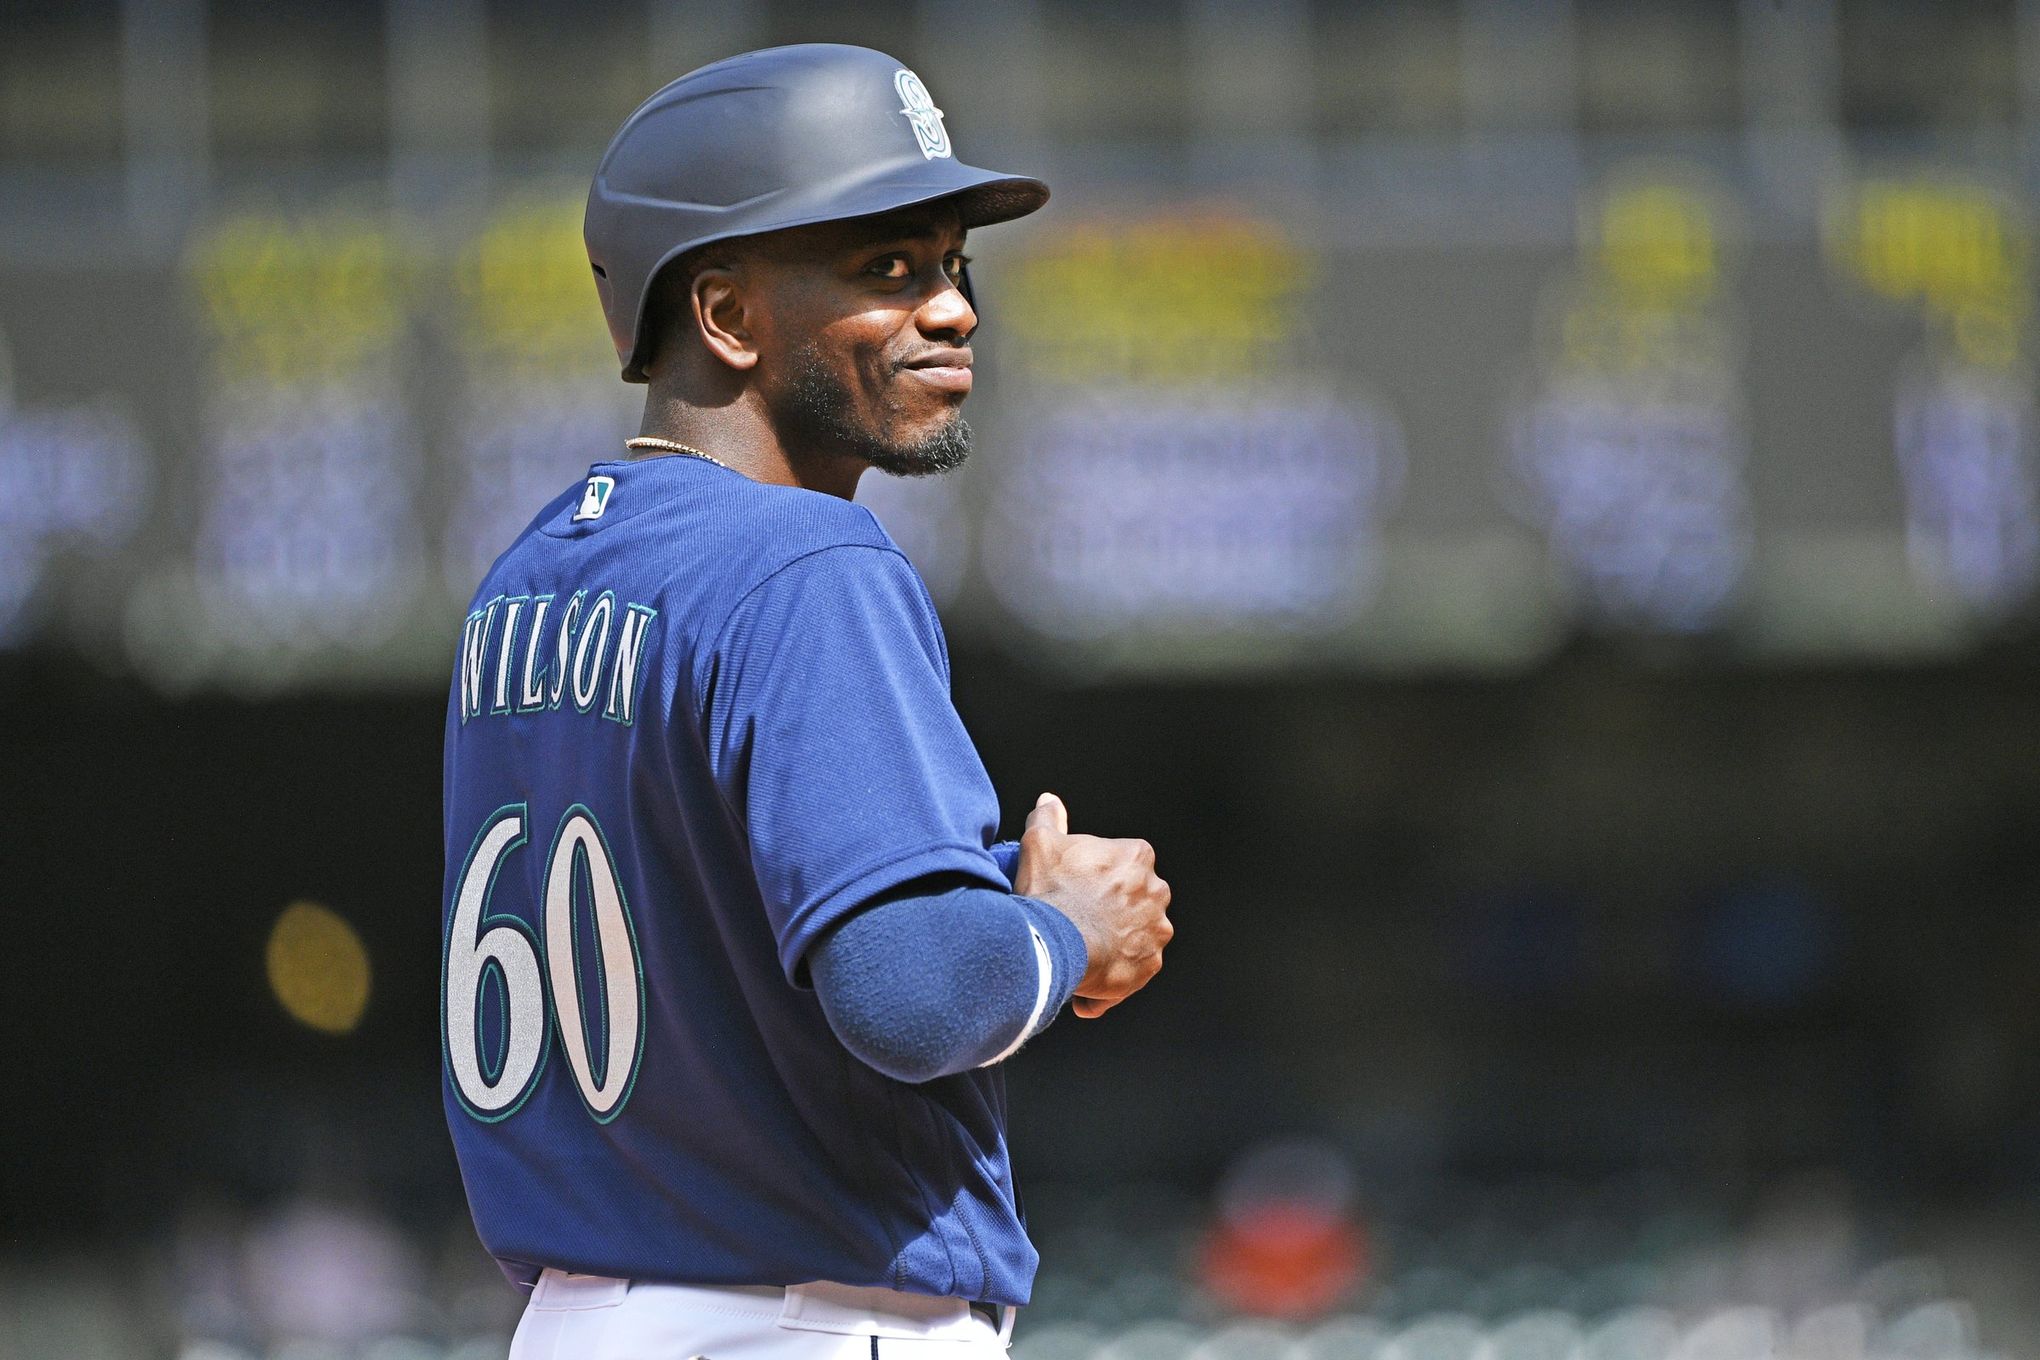 After eight years of the grind, Marcus Wilson makes his major league debut  with the Mariners